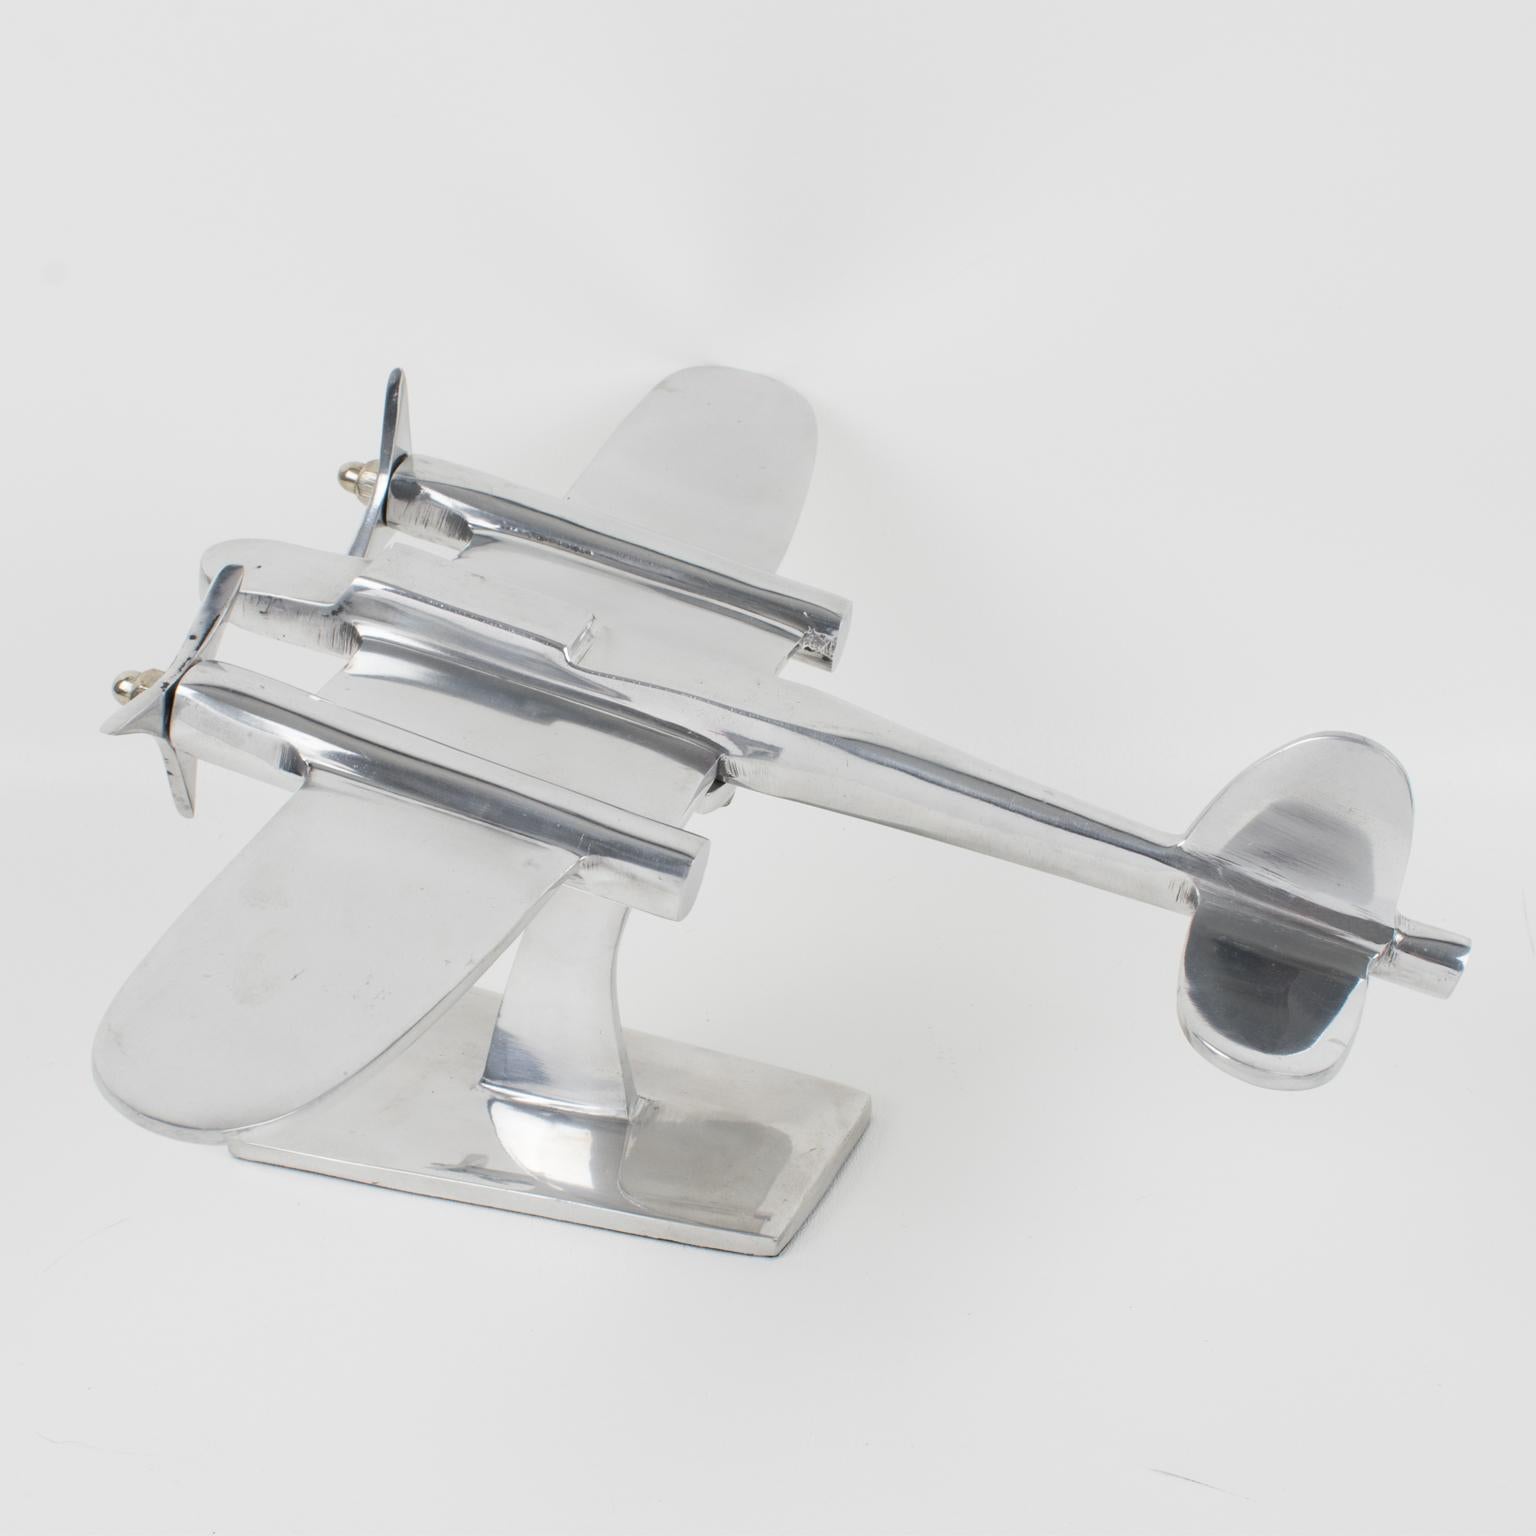 Elegant French aluminum airplane model mounted on a metal plinth. This nice sculptural model airplane is made with polished cast aluminum and has two original metal propellers. Standing on a geometric metal plinth with aluminum shaped arm. No